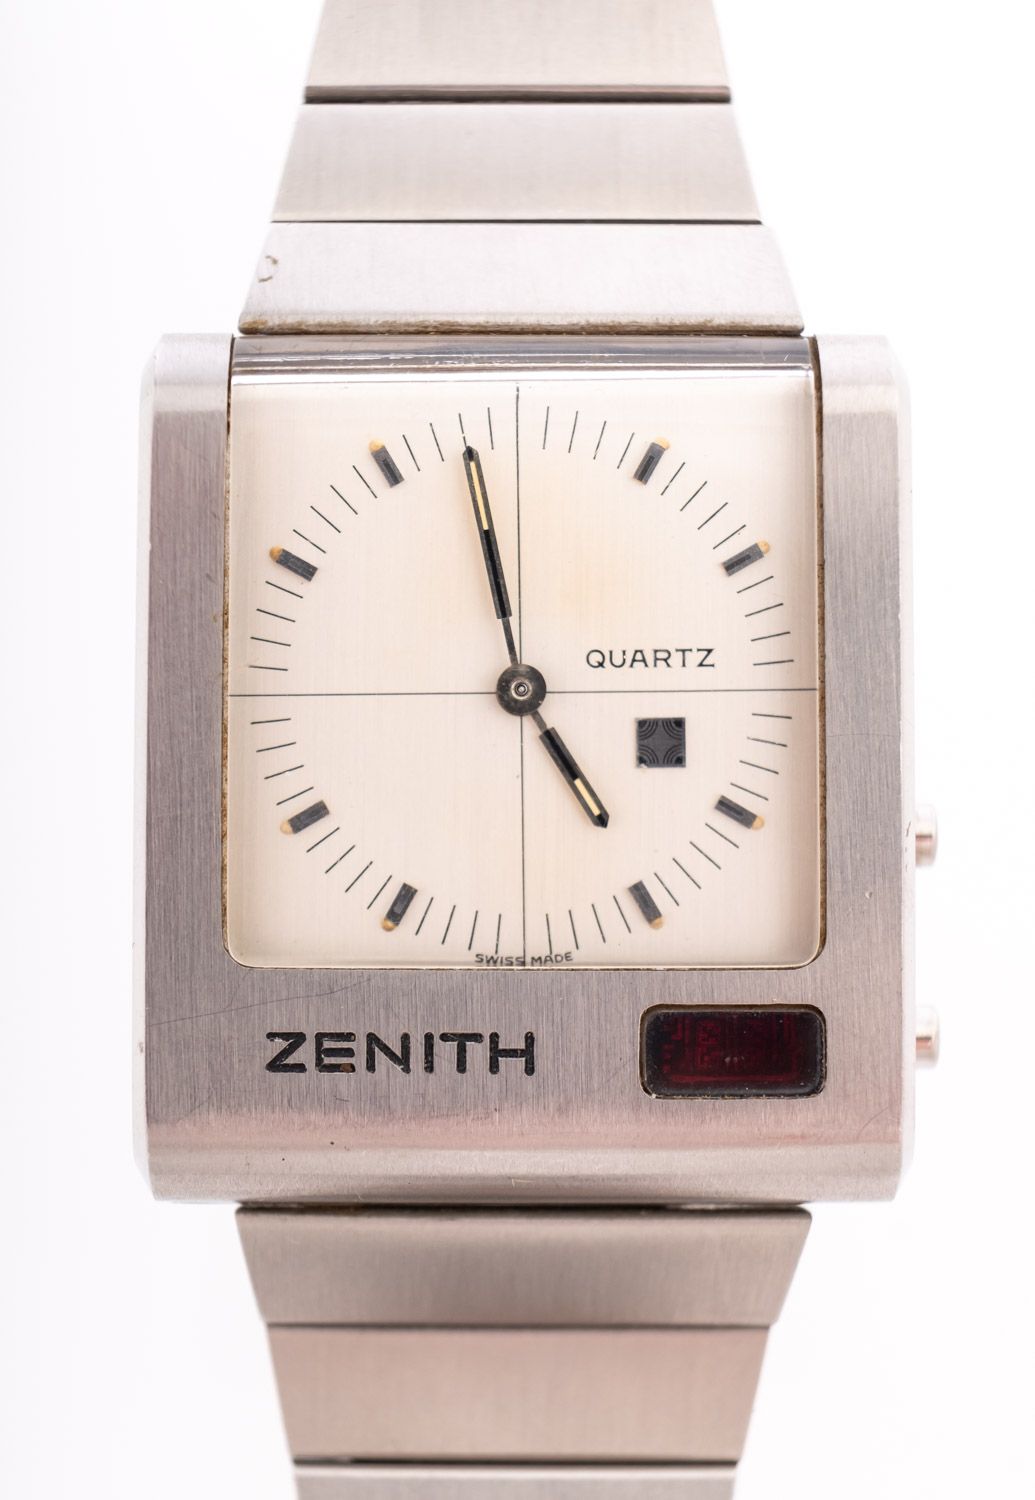 Zenith Time Commando a rectangular quartz stainless-steel wrist watch with date and LED screen to